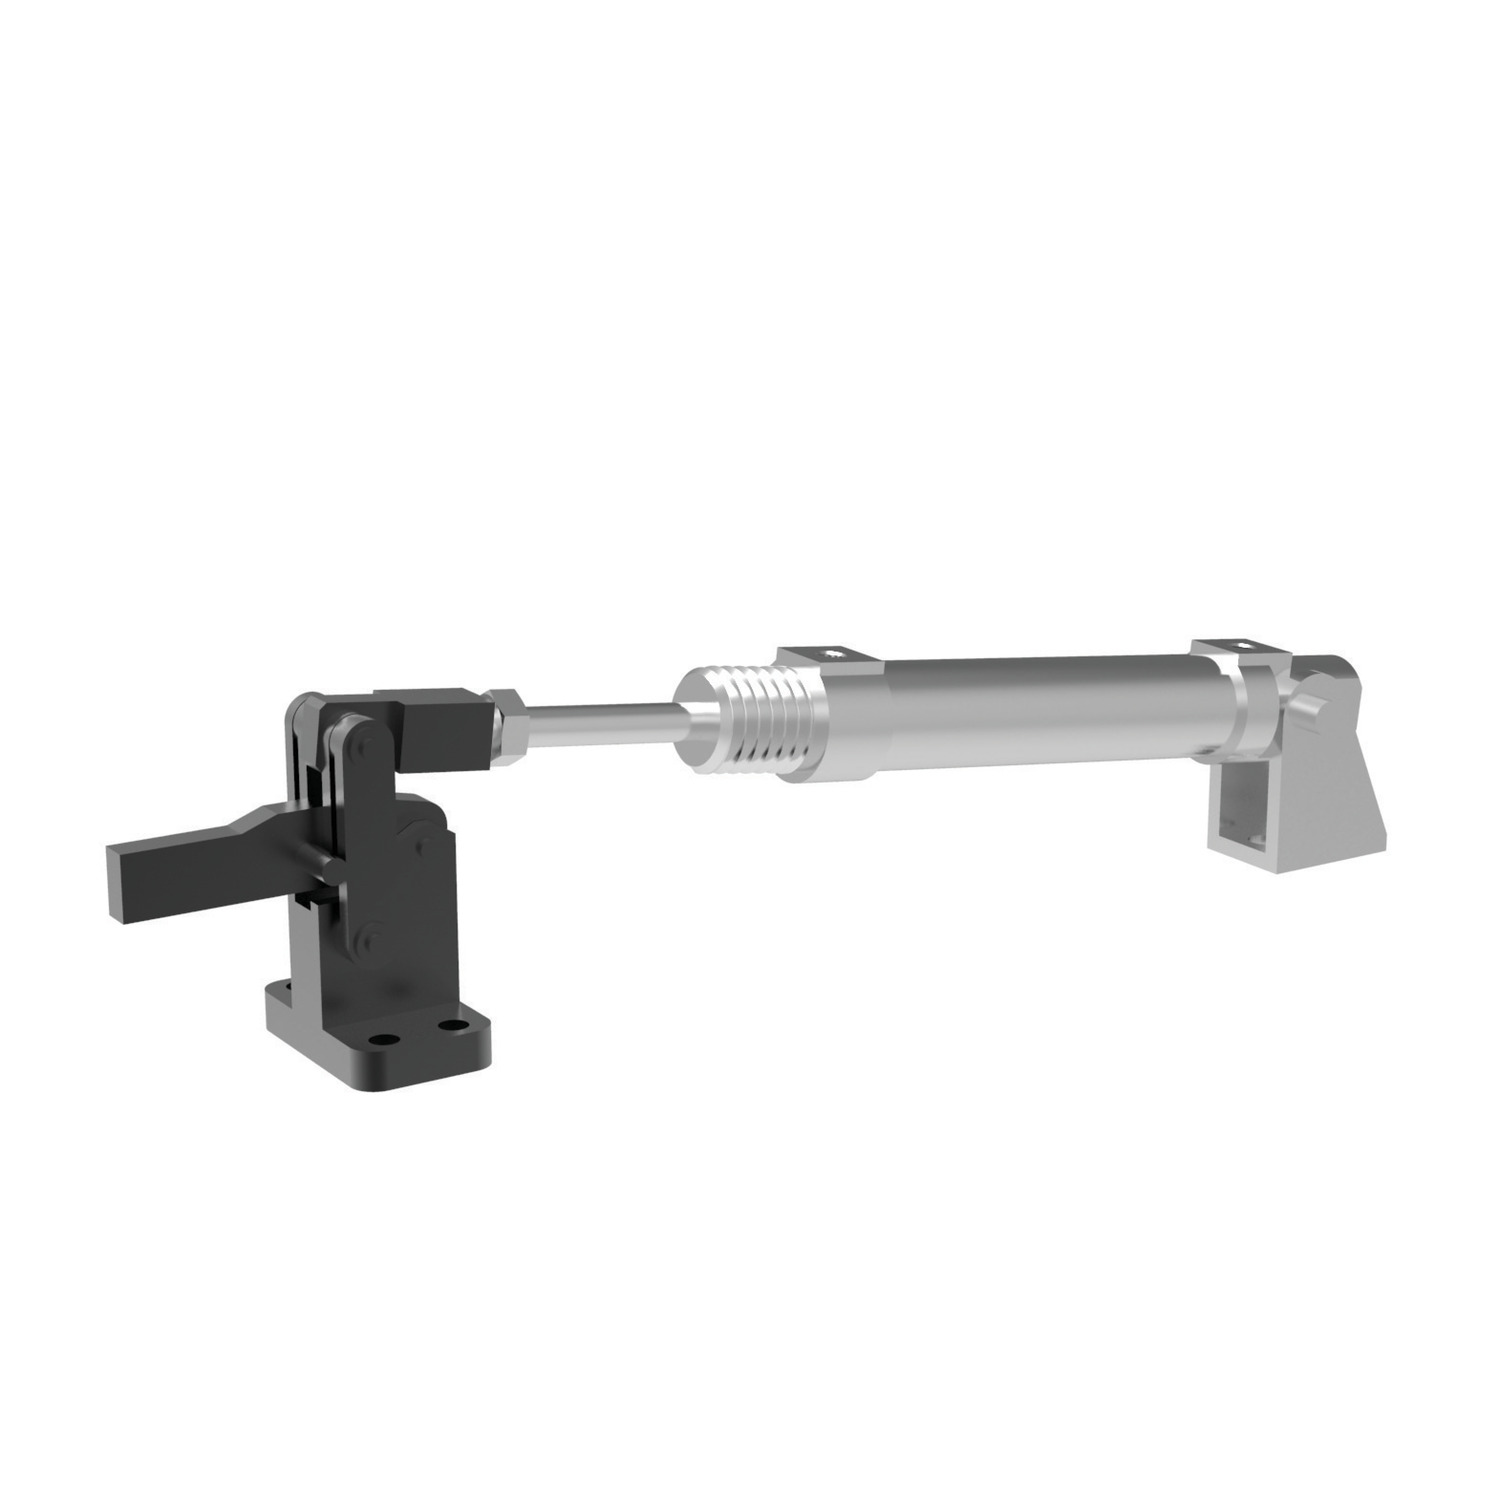 Pneumatic Toggle Clamps Our heavy duty horizontal pneumatic toggle clamps are made from carbon steel. Ideal for installation in material handling lines.